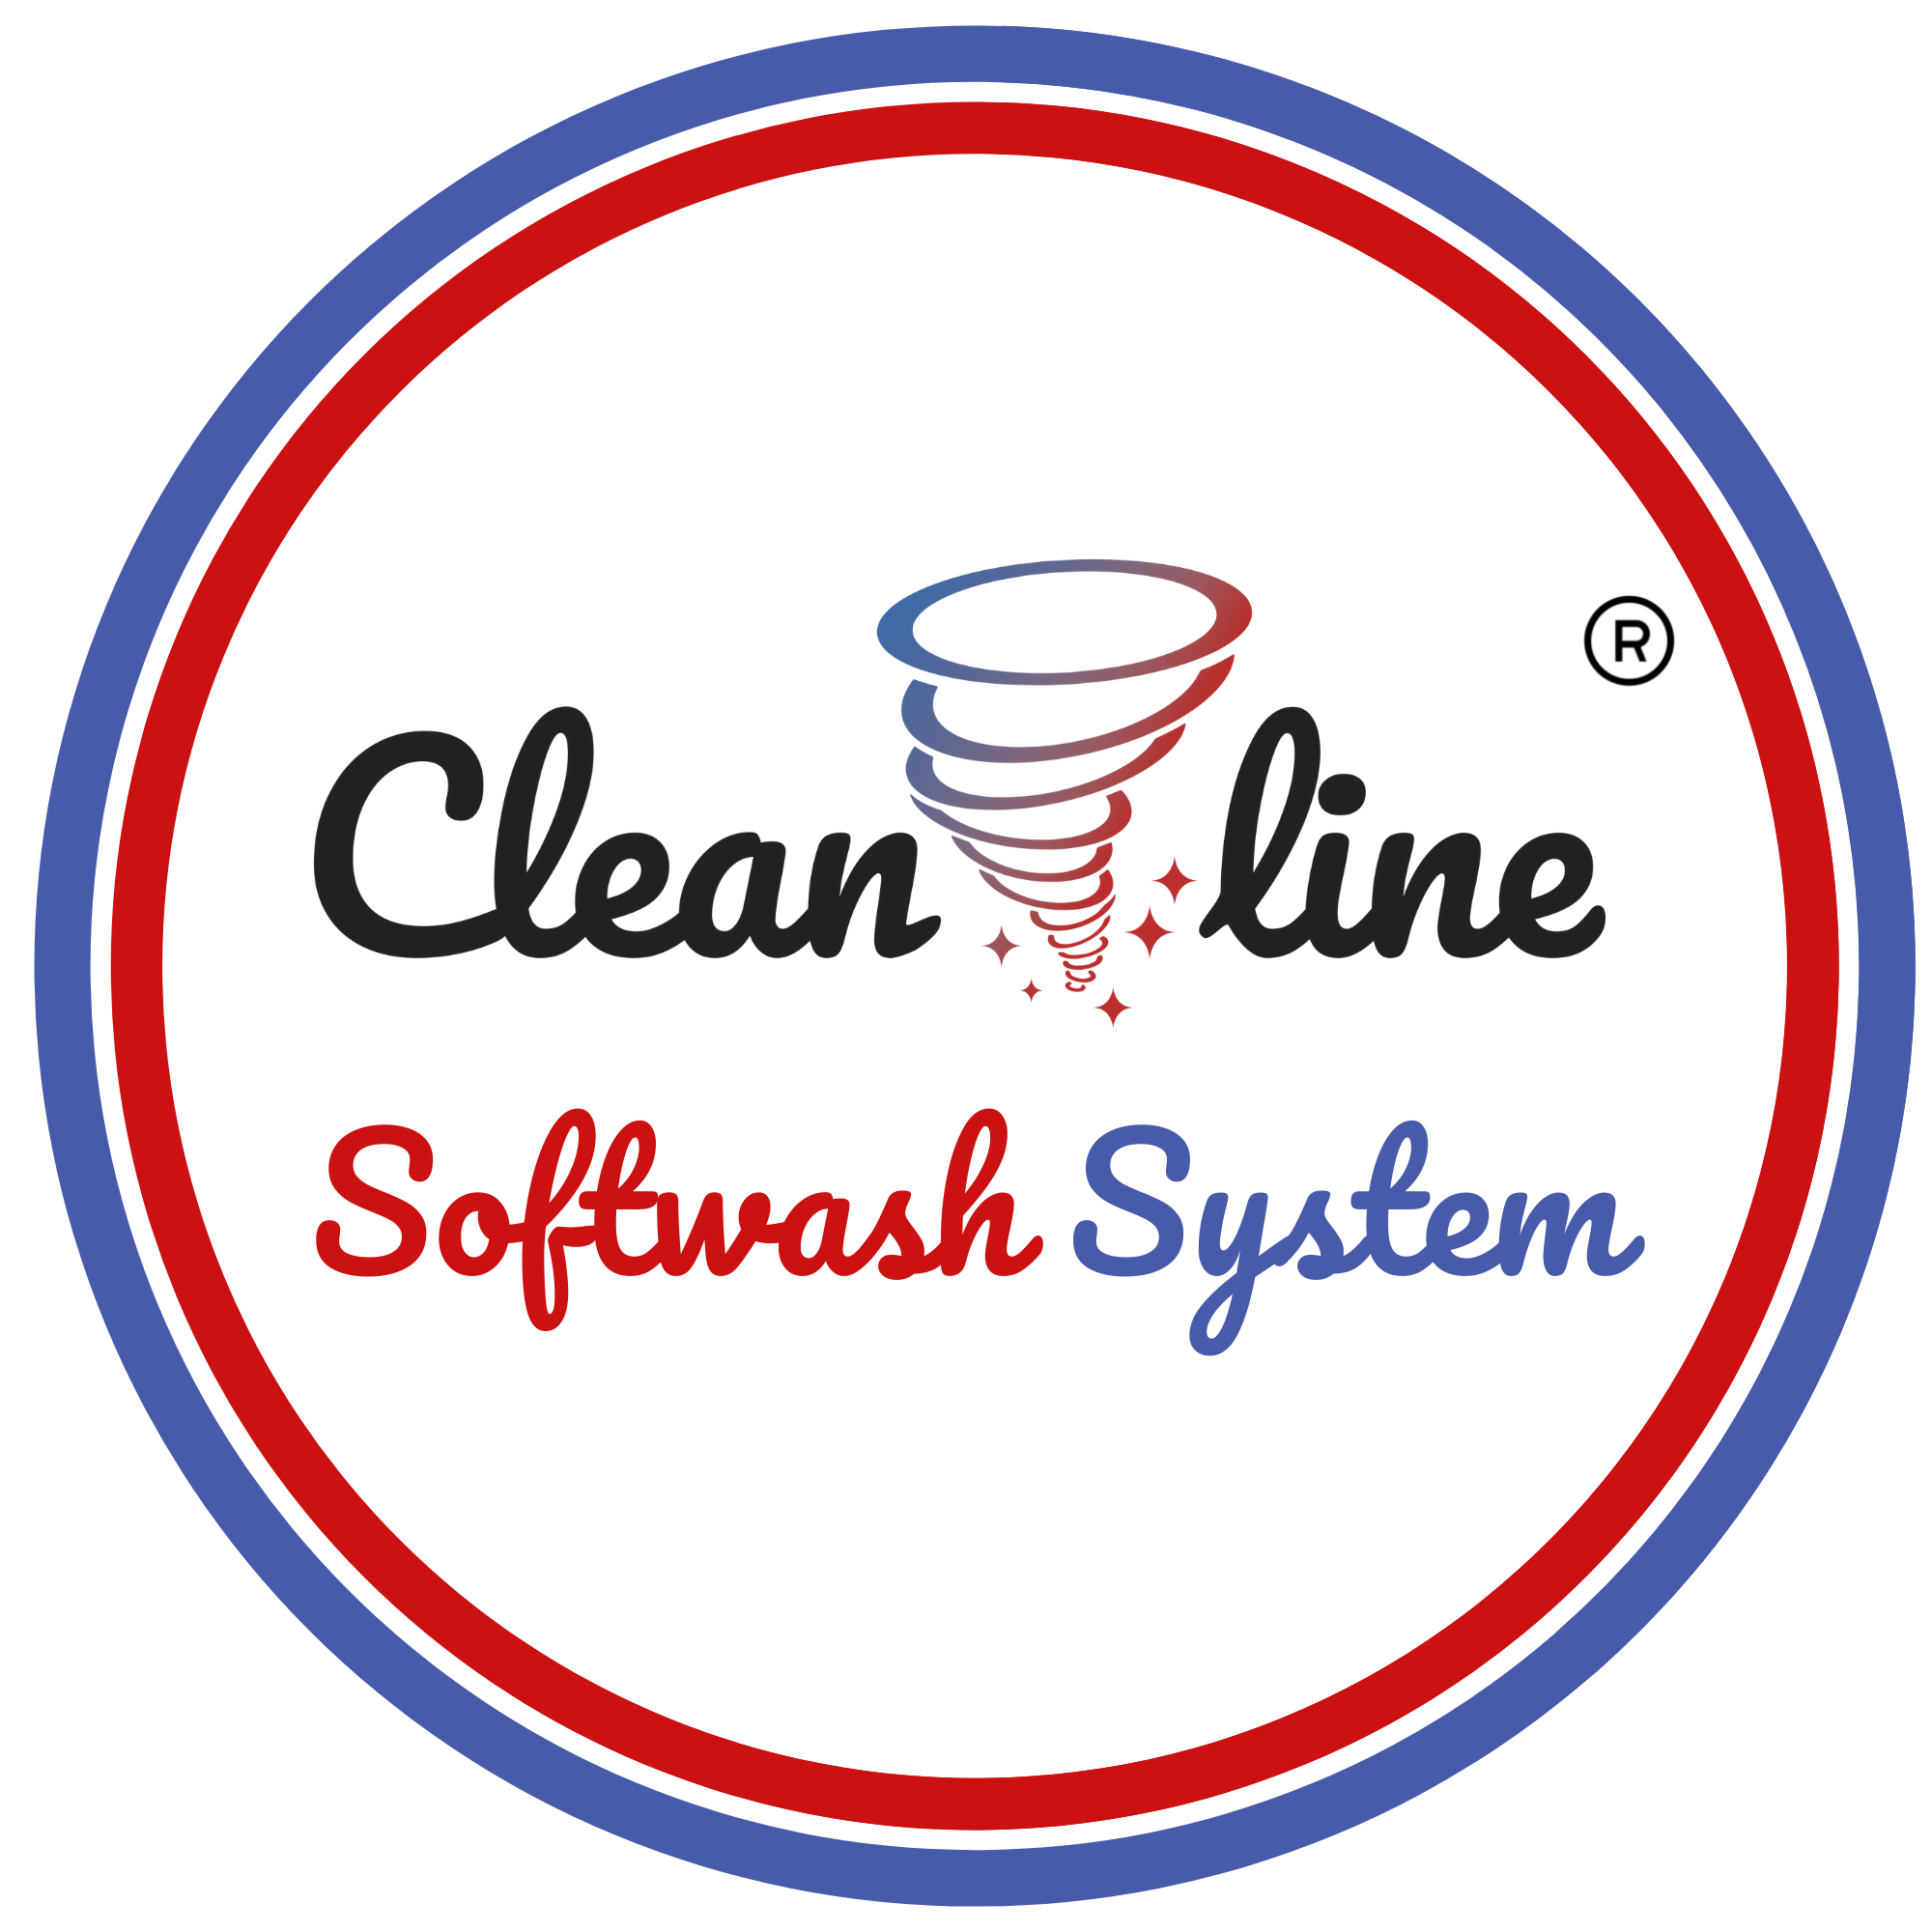 cleanline